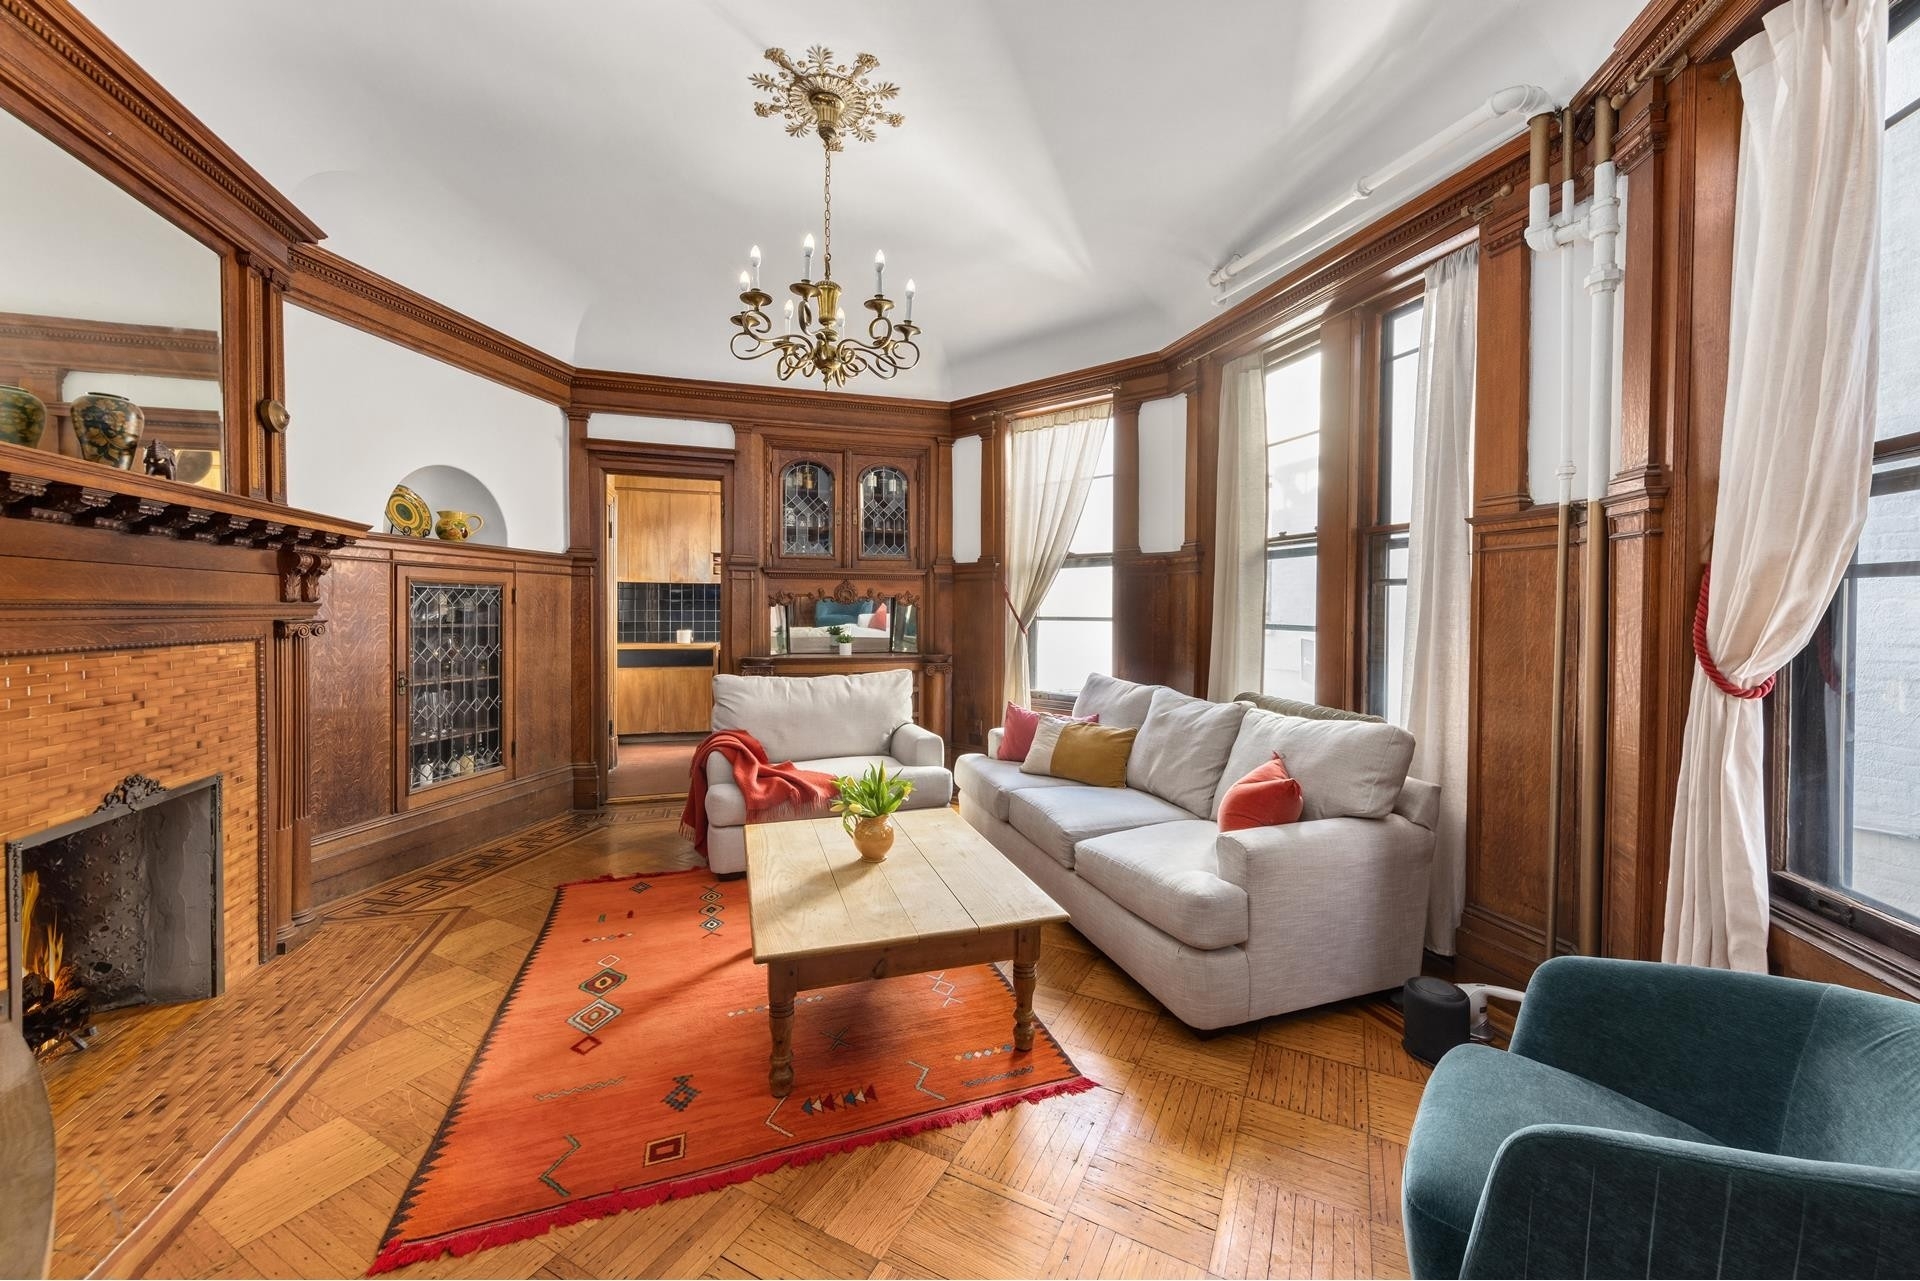 Co-op Properties for Sale at 120 PROSPECT PARK W, 2 Park Slope, Brooklyn, NY 11215